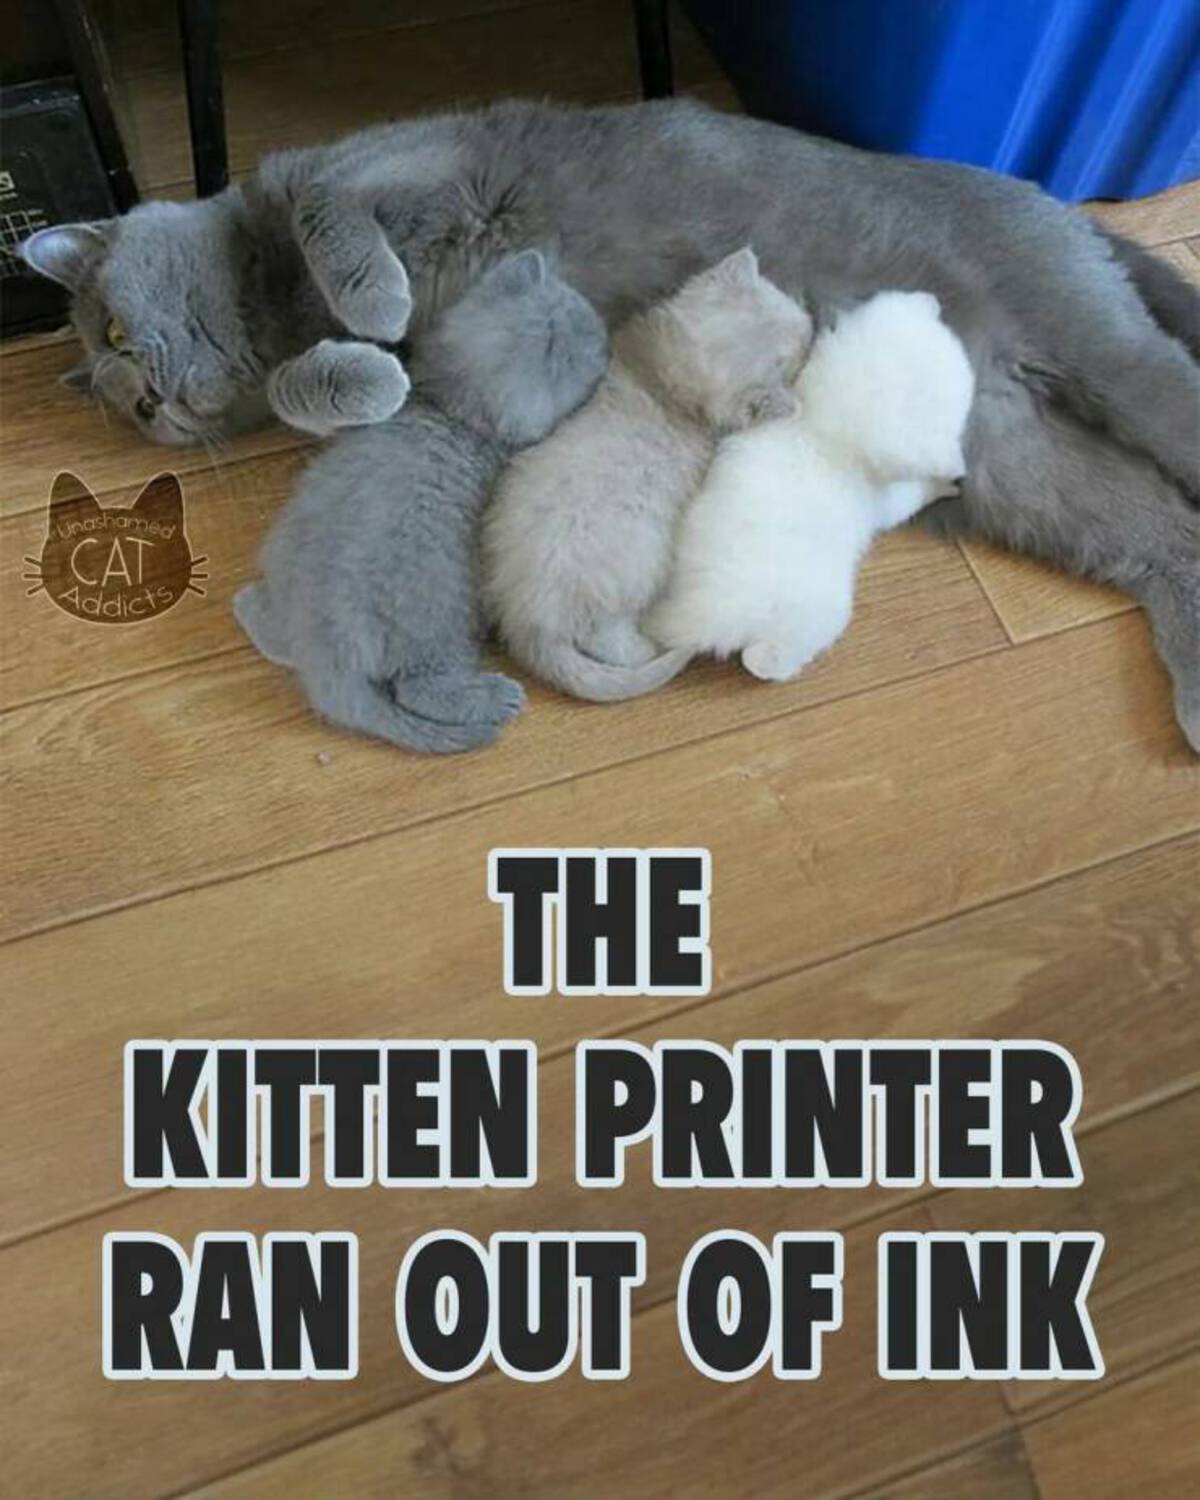 paw - Unashamed Cat Addicts The Kitten Printer Ran Out Of Ink